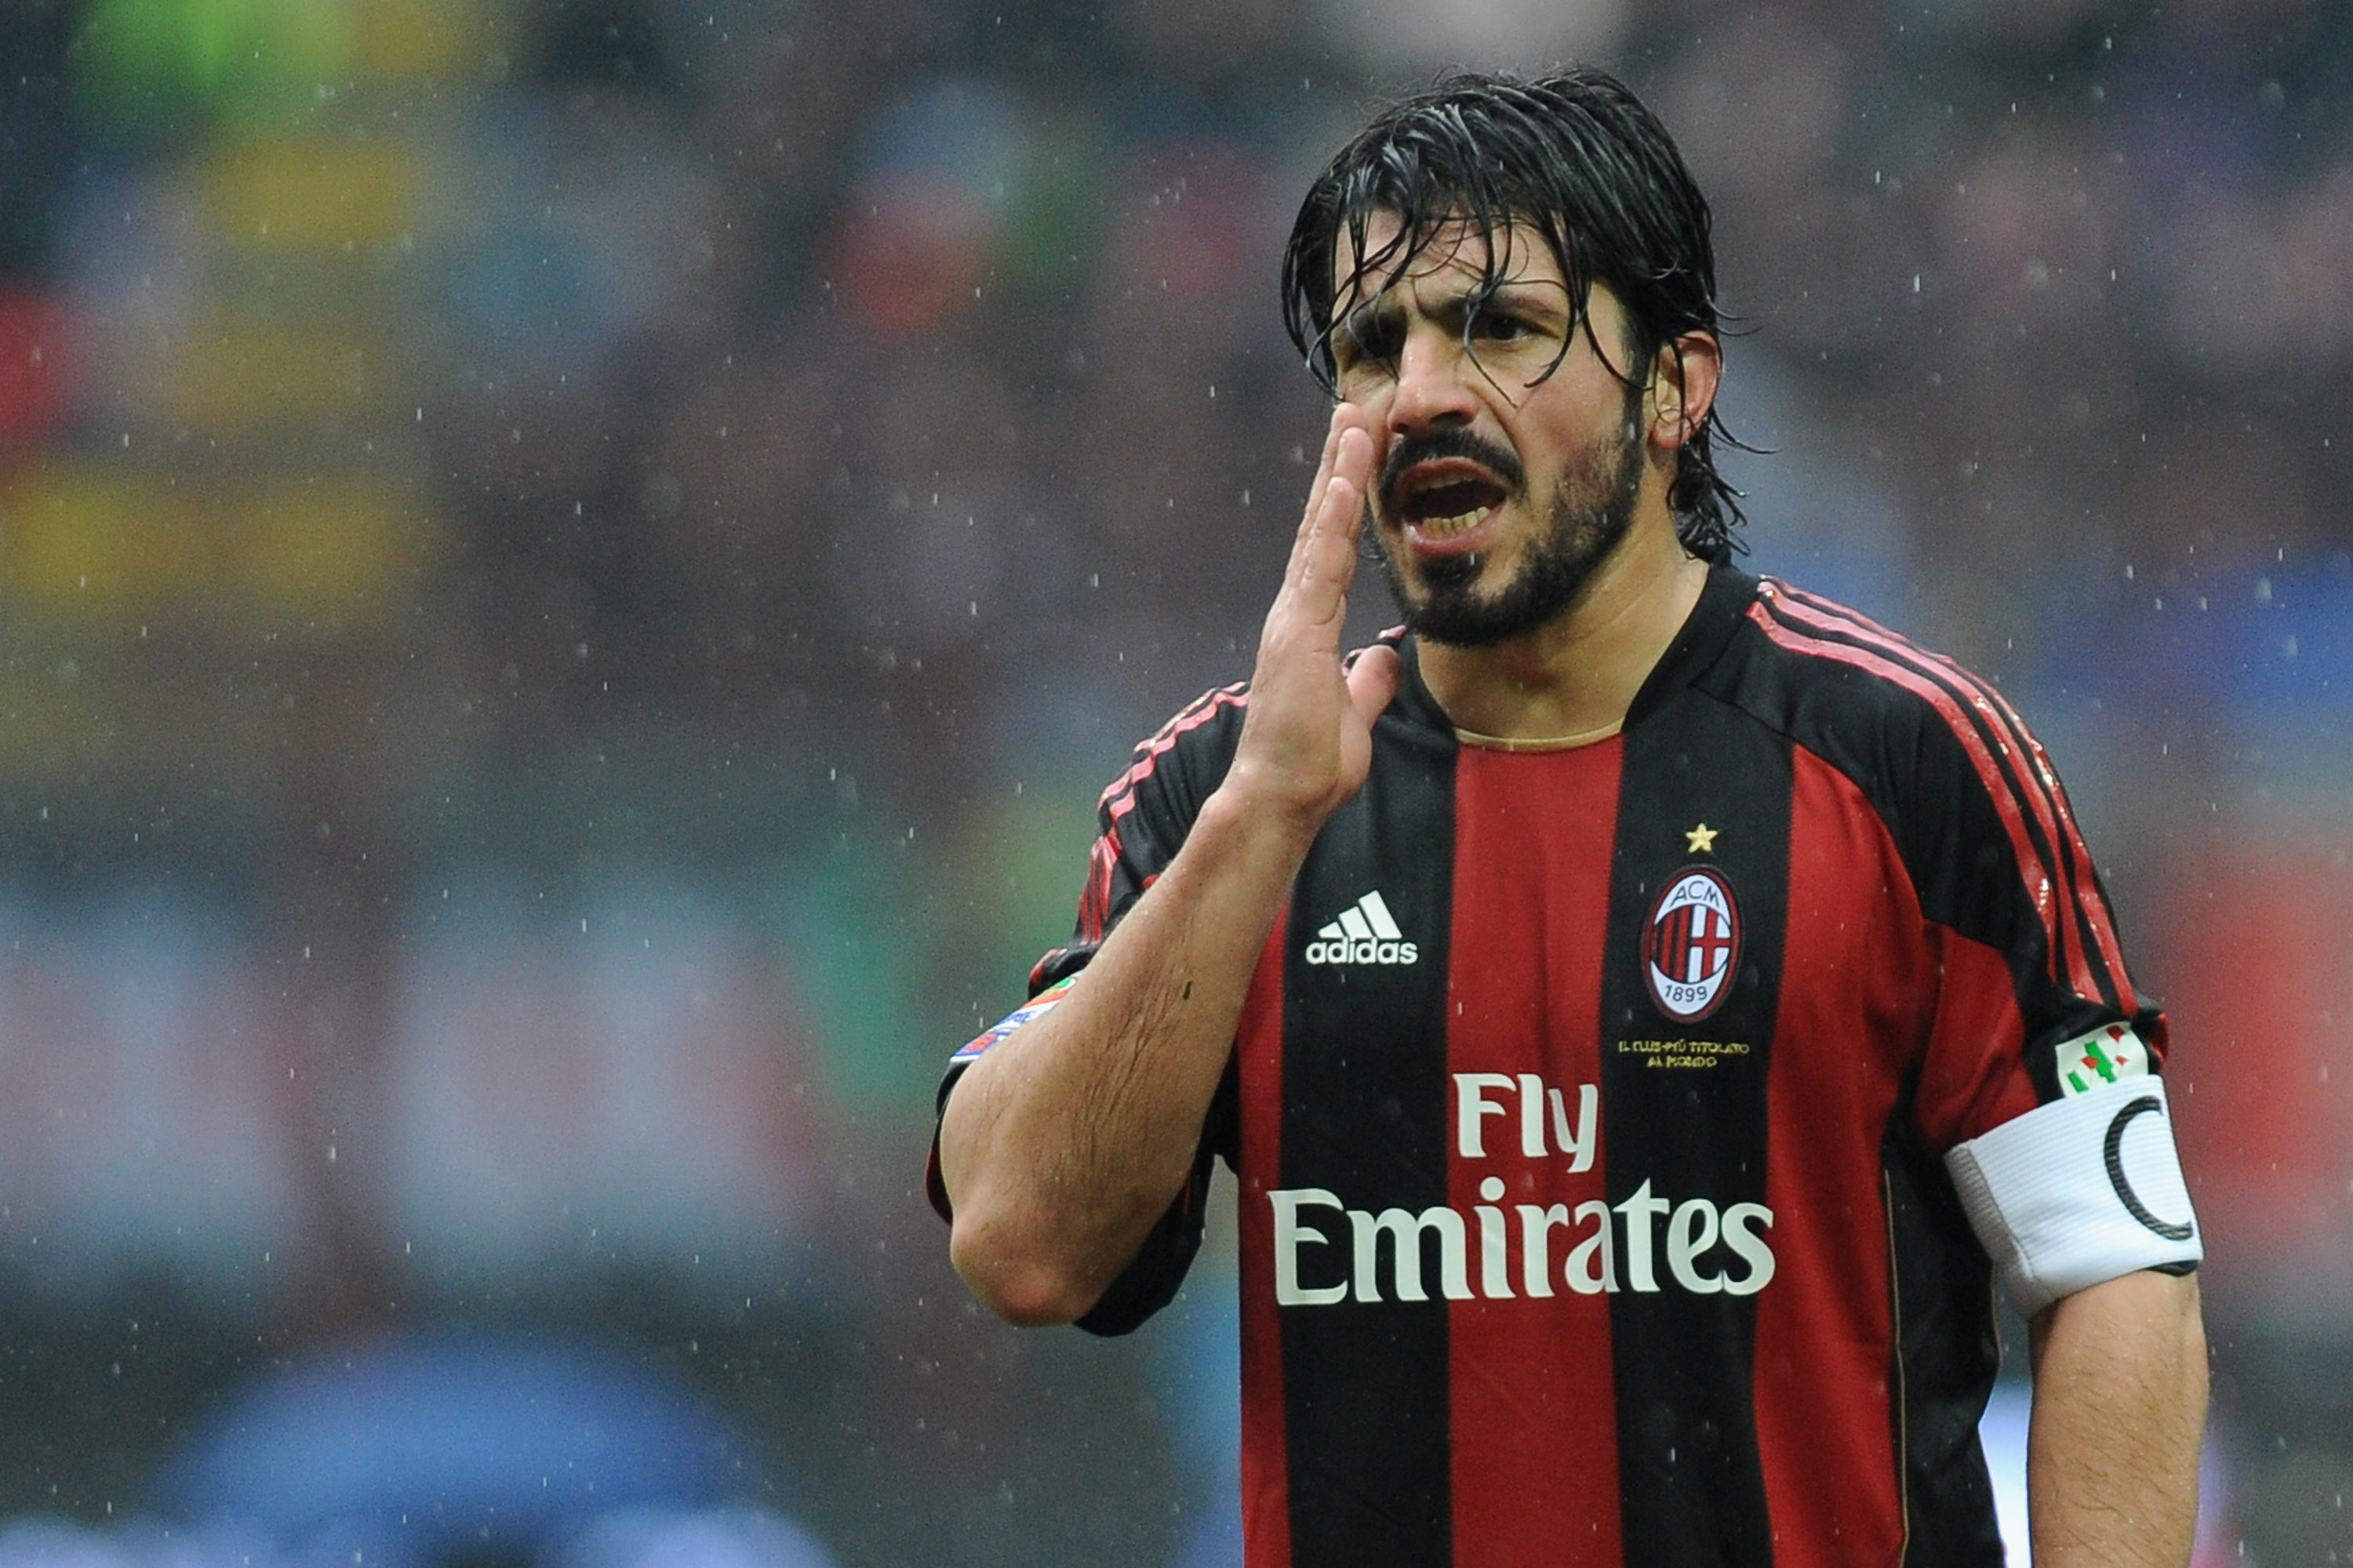 MILAN, ITALY - MARCH 13:  Gennaro Ivan Gattuso of AC Milan gestures during the Serie A match between AC Milan and AS Bari at Stadio Giuseppe Meazza on March 13, 2011 in Milan, Italy.  (Photo by Valerio Pennicino/Getty Images)